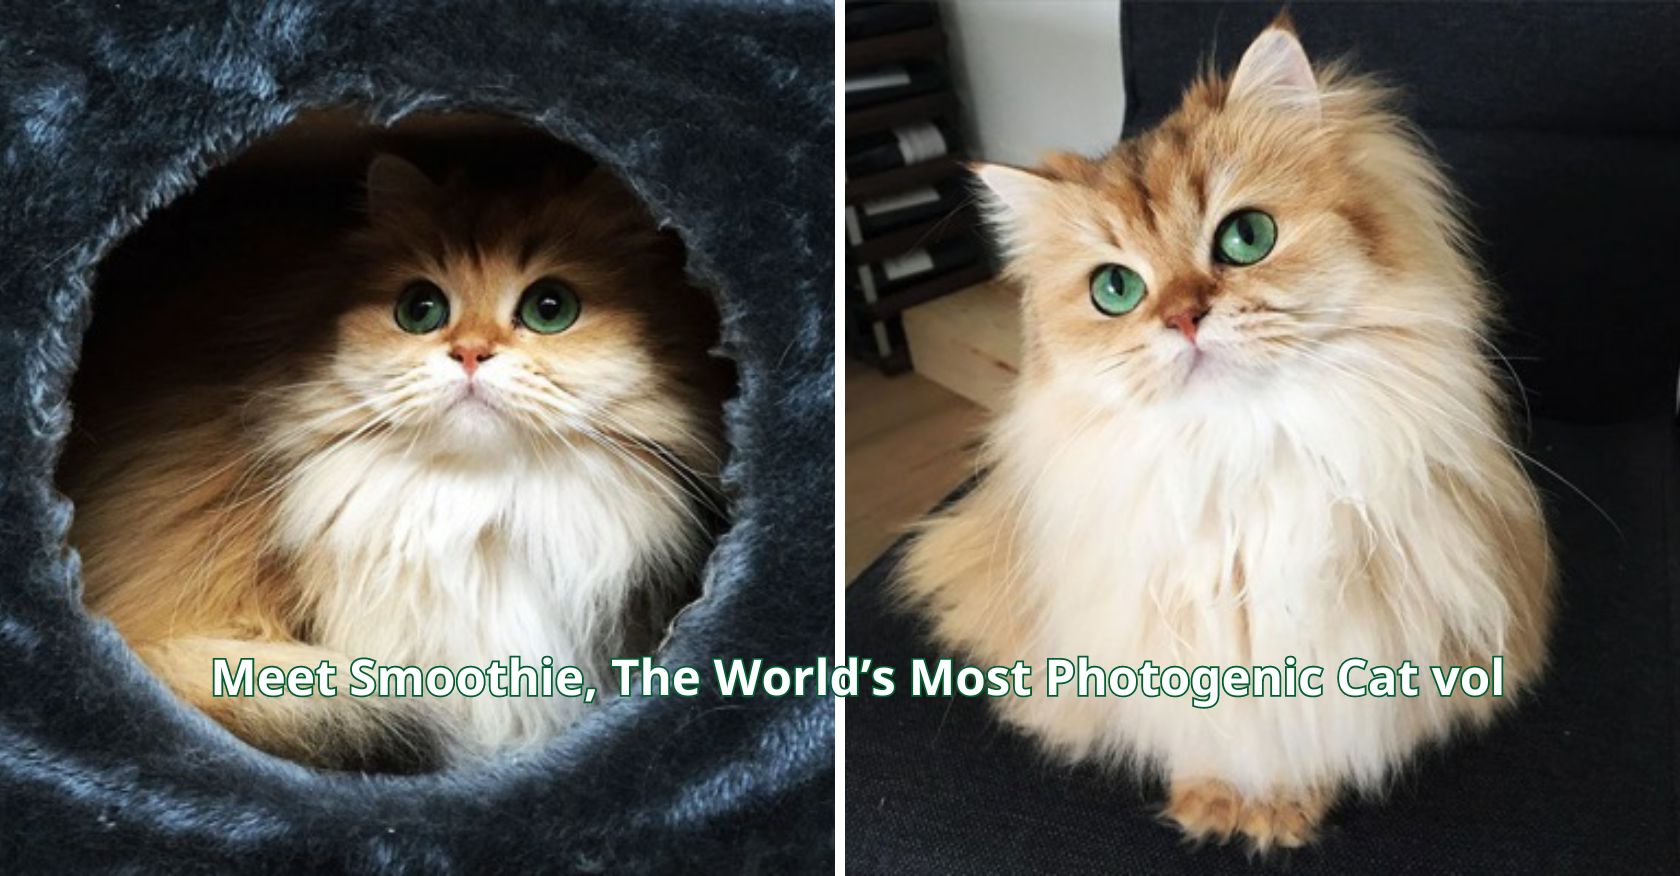 Meet Smoothie, The World’s Most Photogenic Cat